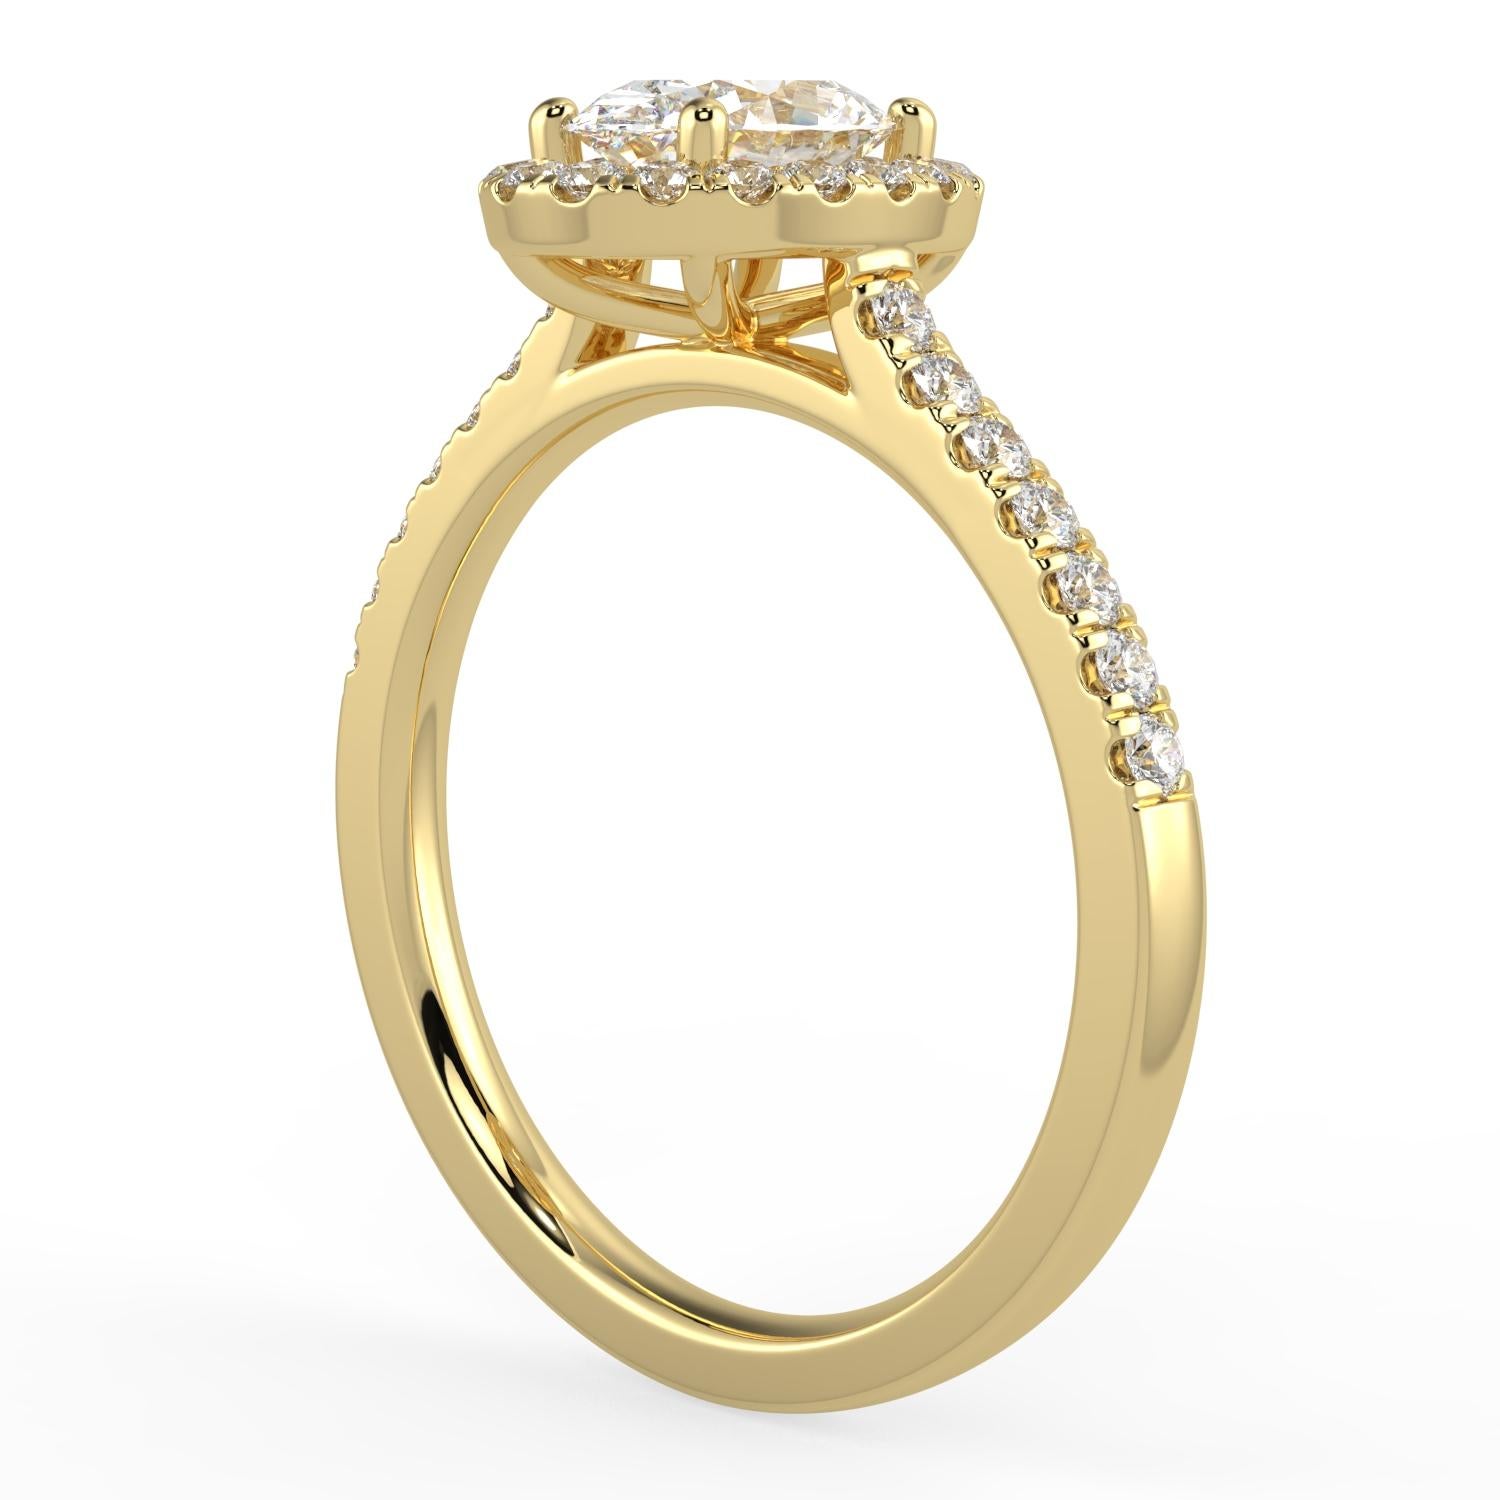 AAMIAA HEARTS DIAMOND RING
1ct Natural Diamond G-H Color SI Clarity Perfect Design Shape Halo Fashion Stunning Promise Ring 14K Yellow Gold

Specification:
Brand: Aamiaa
Metal: Yellow Gold
Metal Purity: 14k
Center Diamond Shape: Oval
Design: